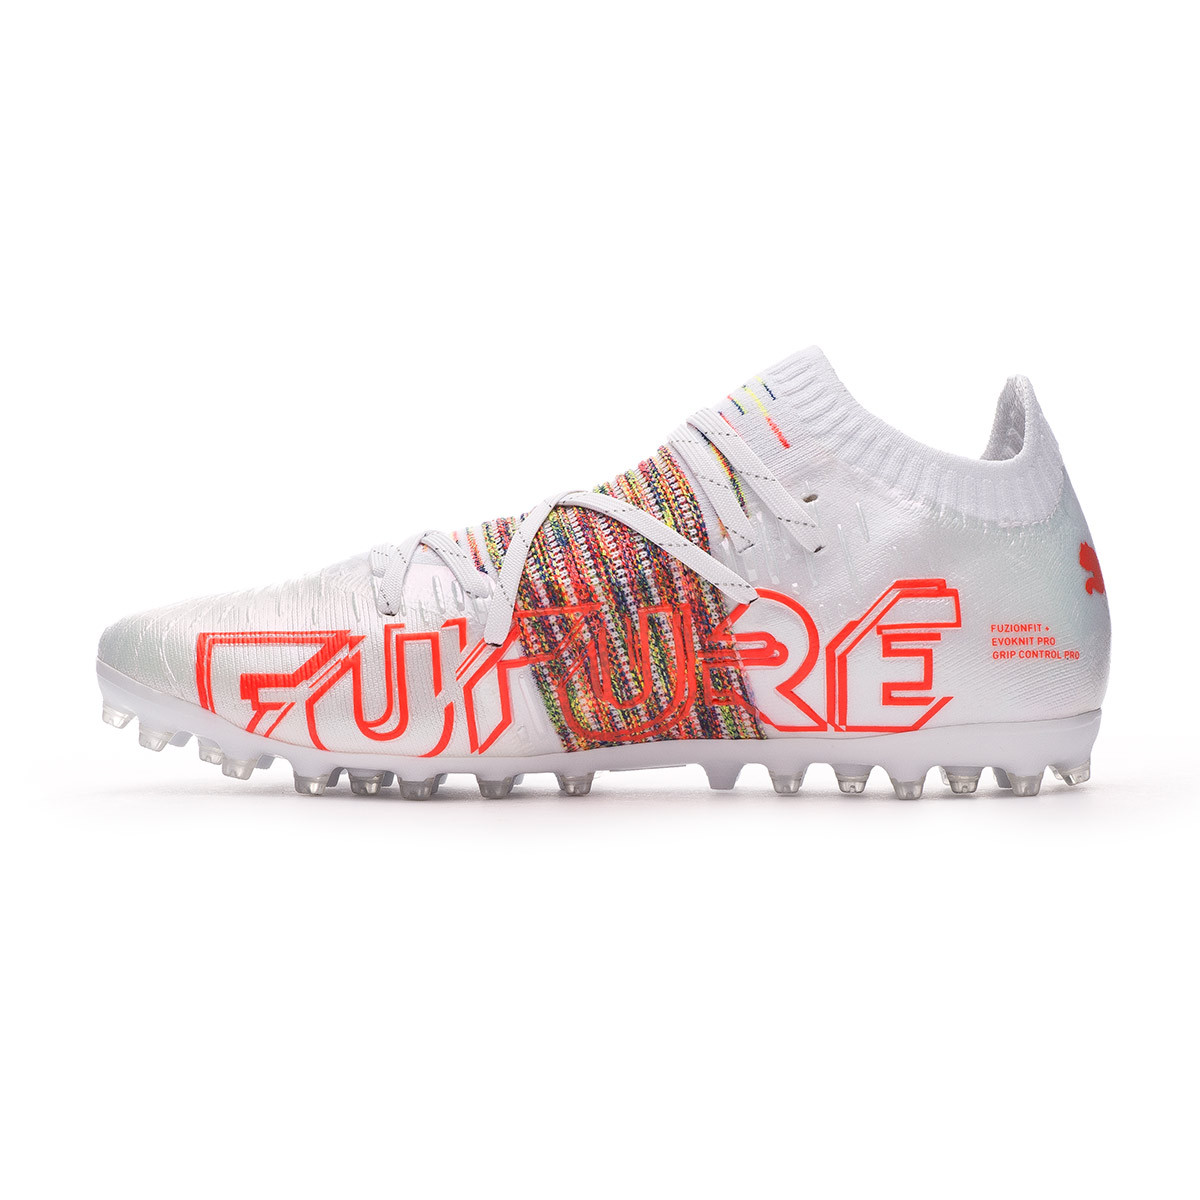 Puma Future Z 1 1 Pro Cage Clothing And Fashion Dresses Denim Tops Shoes And More Free Shipping